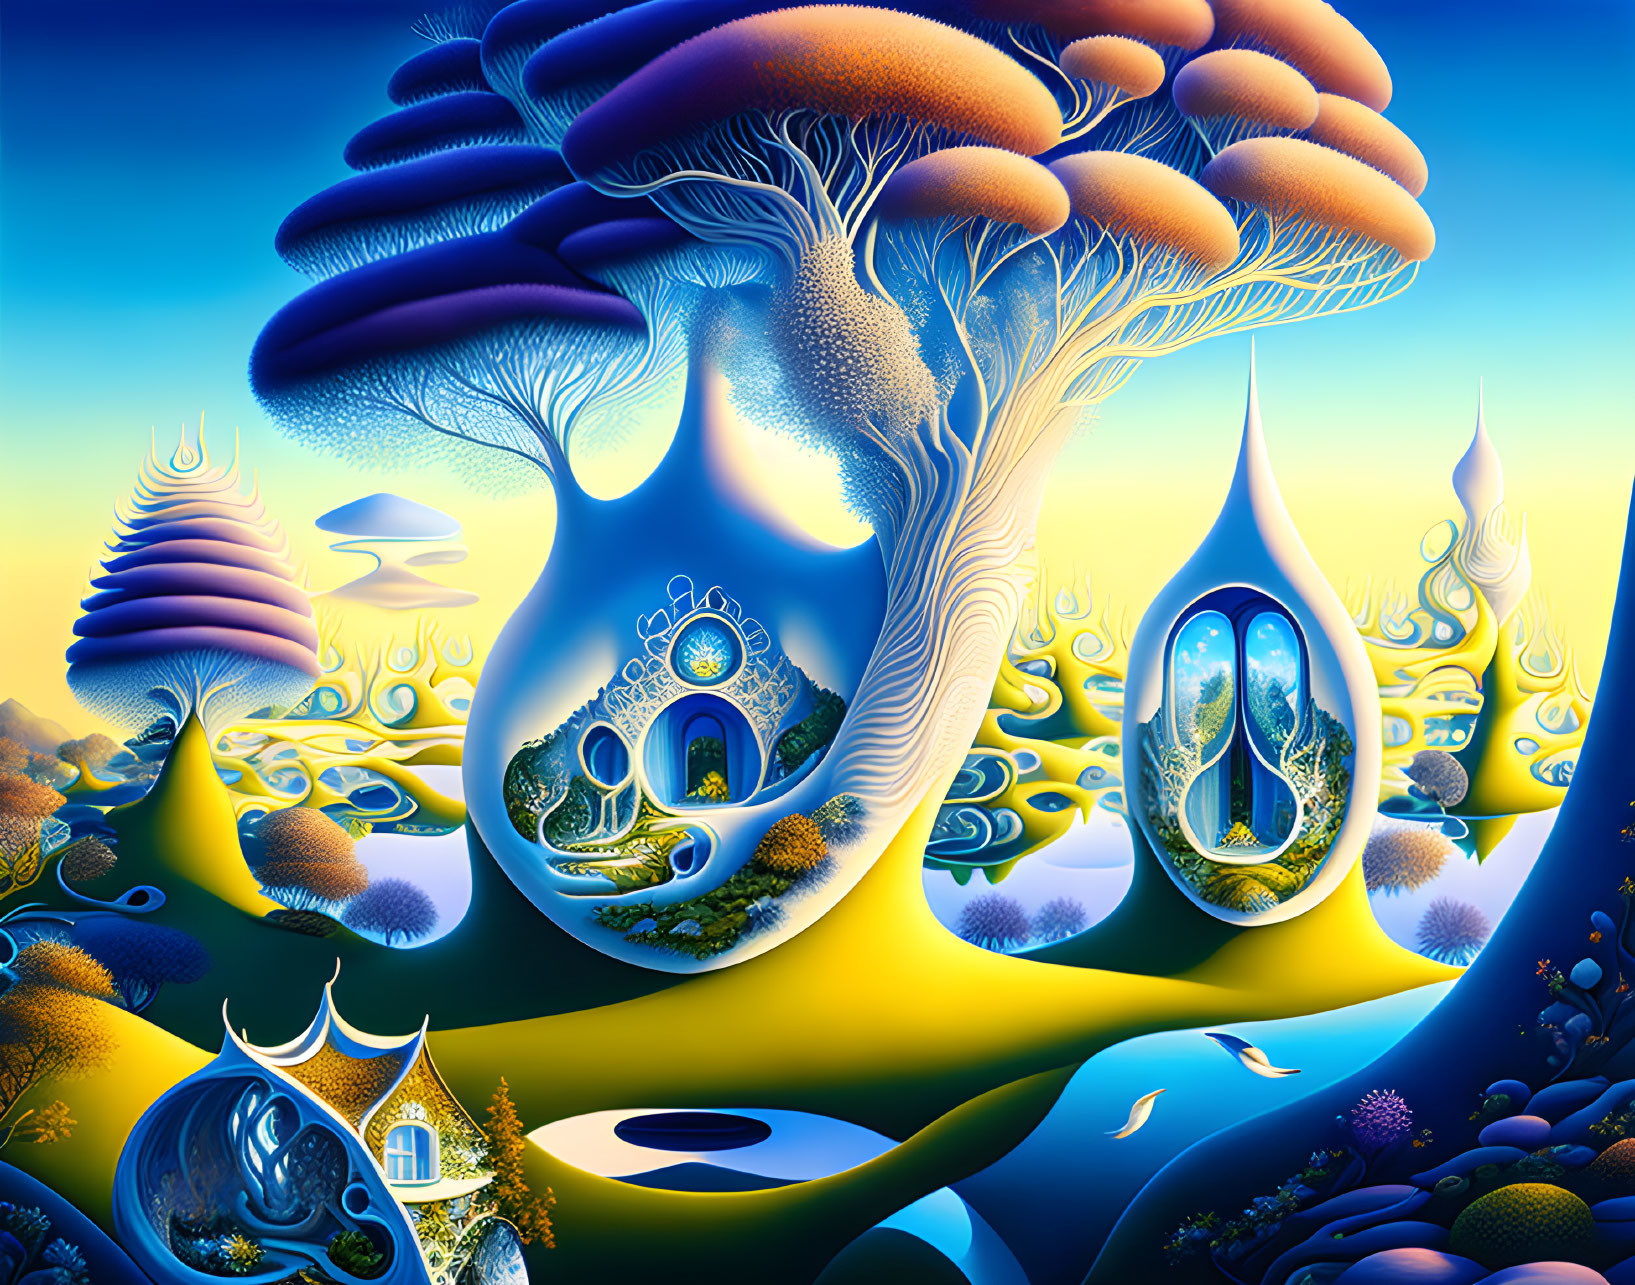 Colorful surreal landscape with whimsical trees and bubble-like dwellings